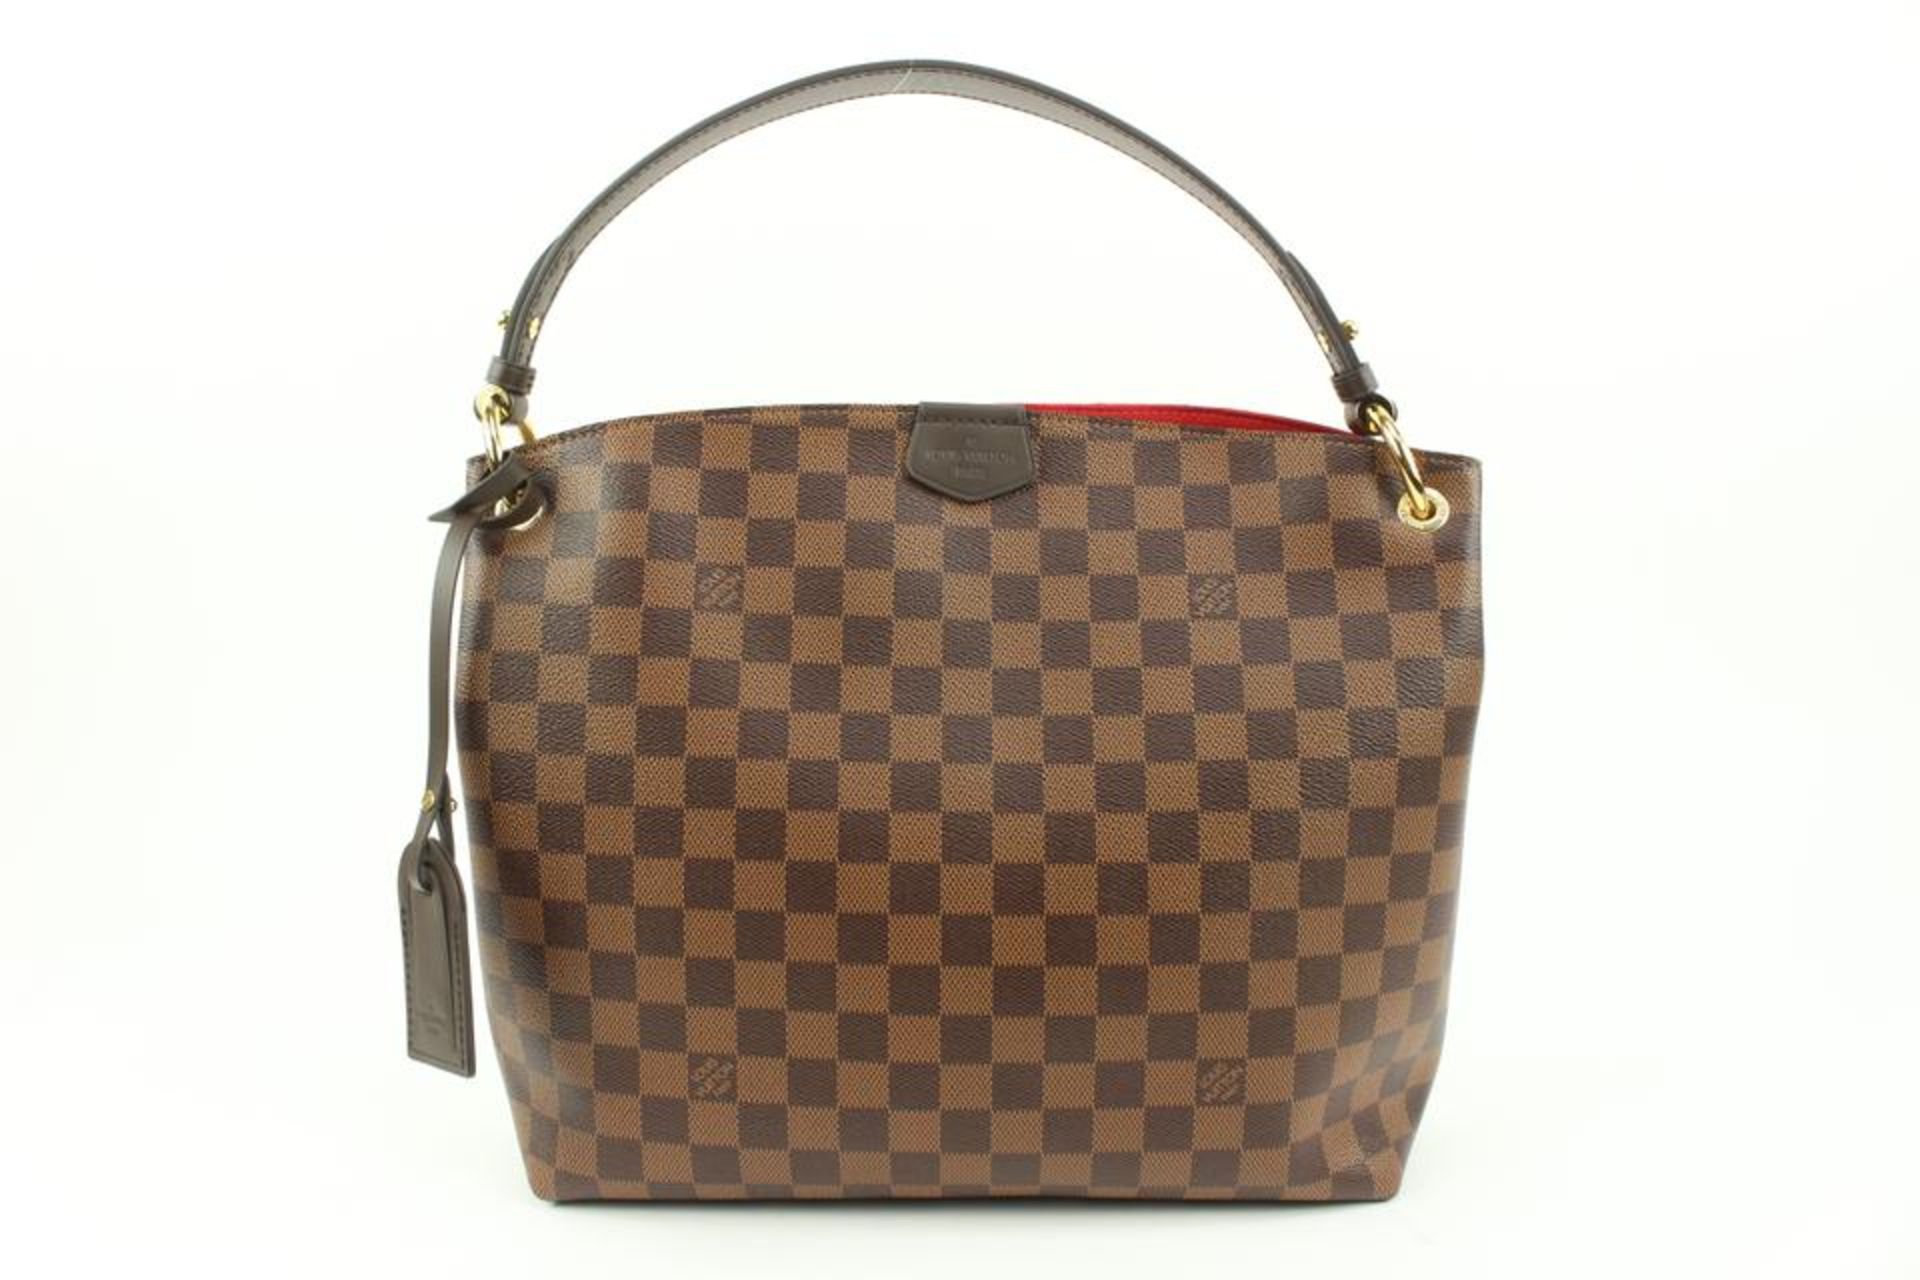 LOUIS VUITTON SOLD OUT EVERWHERE BRAND NEW DAMIER EBENE GRACEFUL PM HOBO - Image 2 of 15